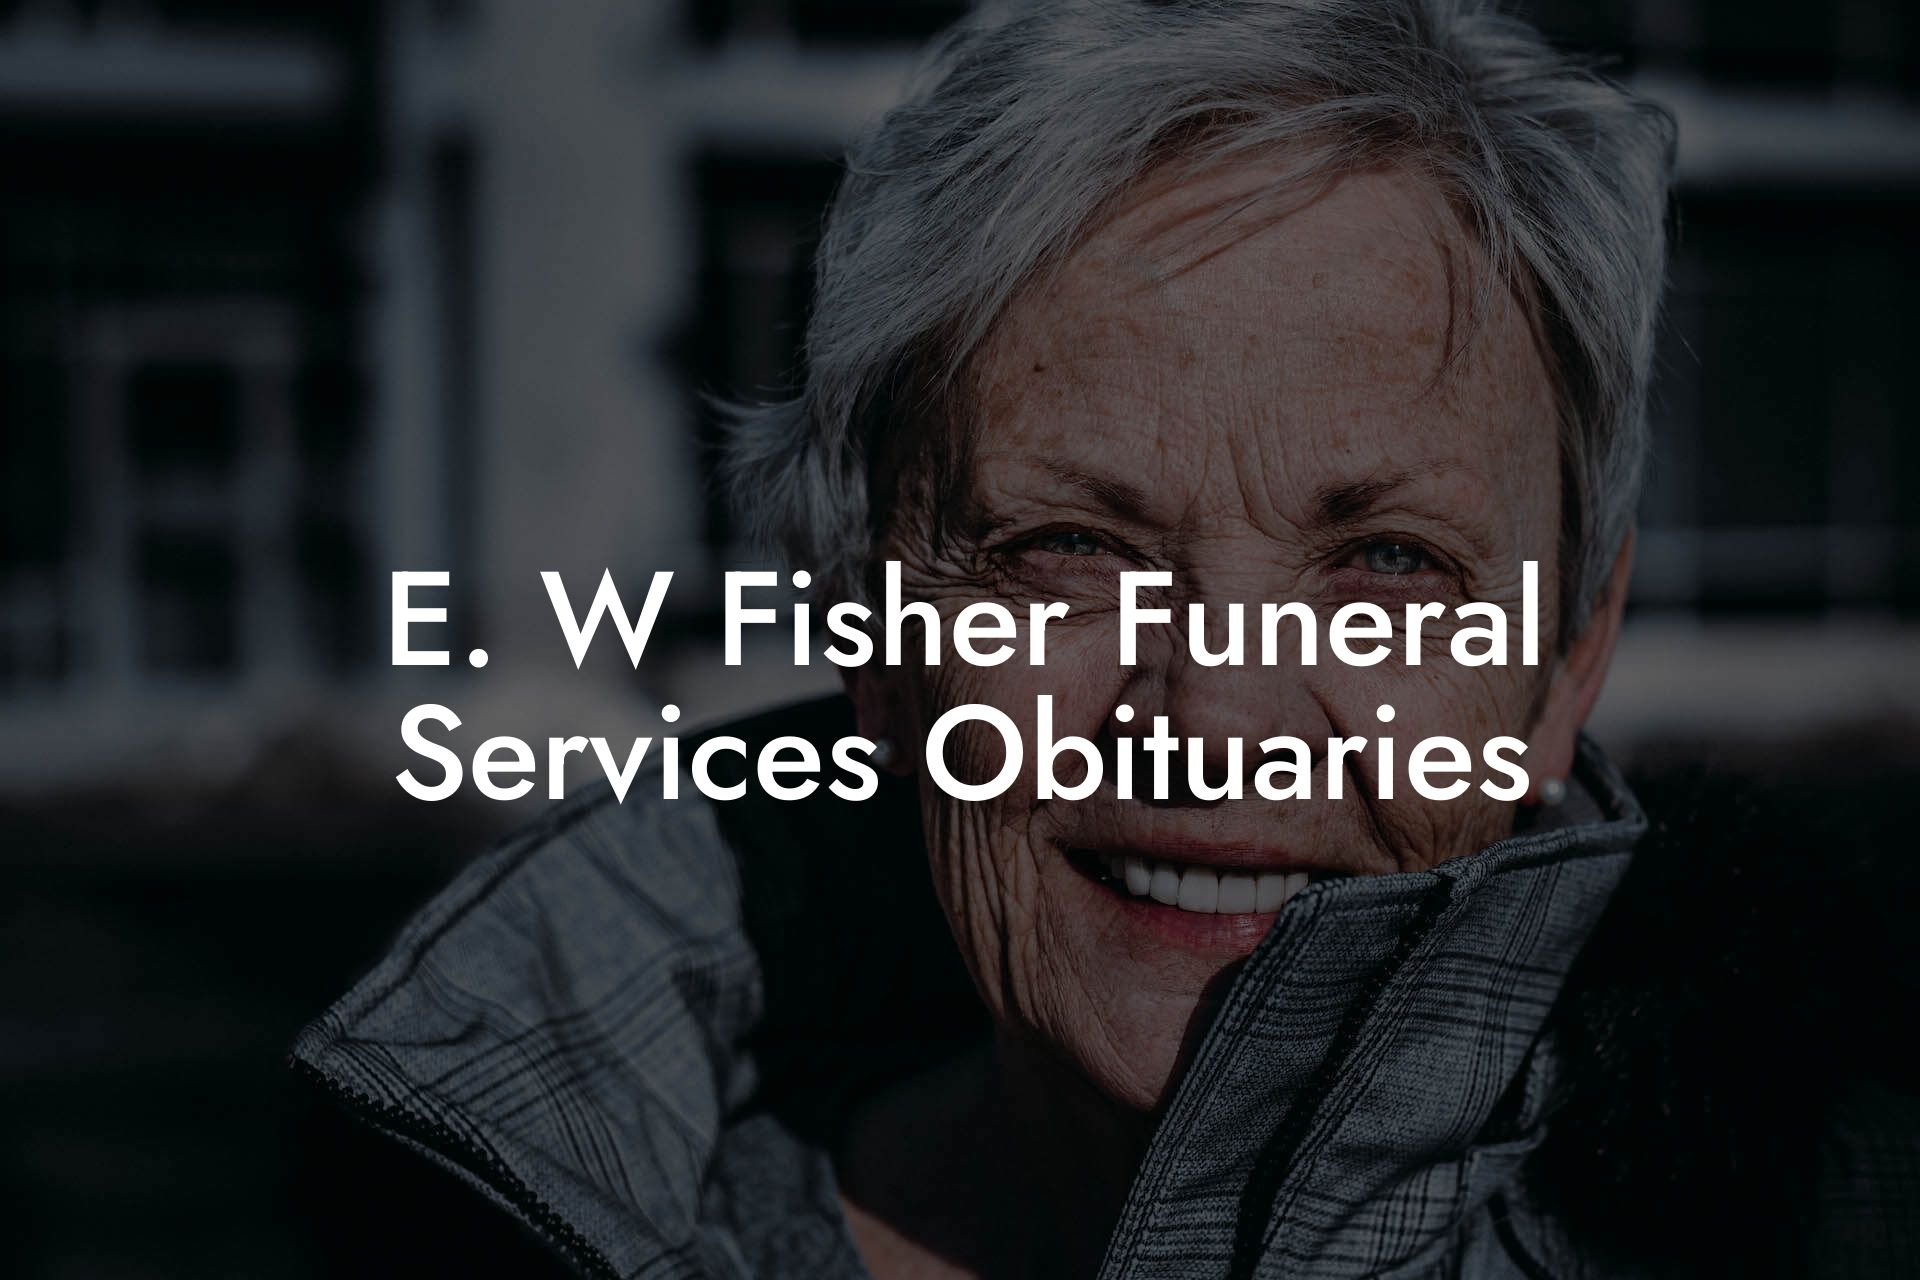 E. W Fisher Funeral Services Obituaries